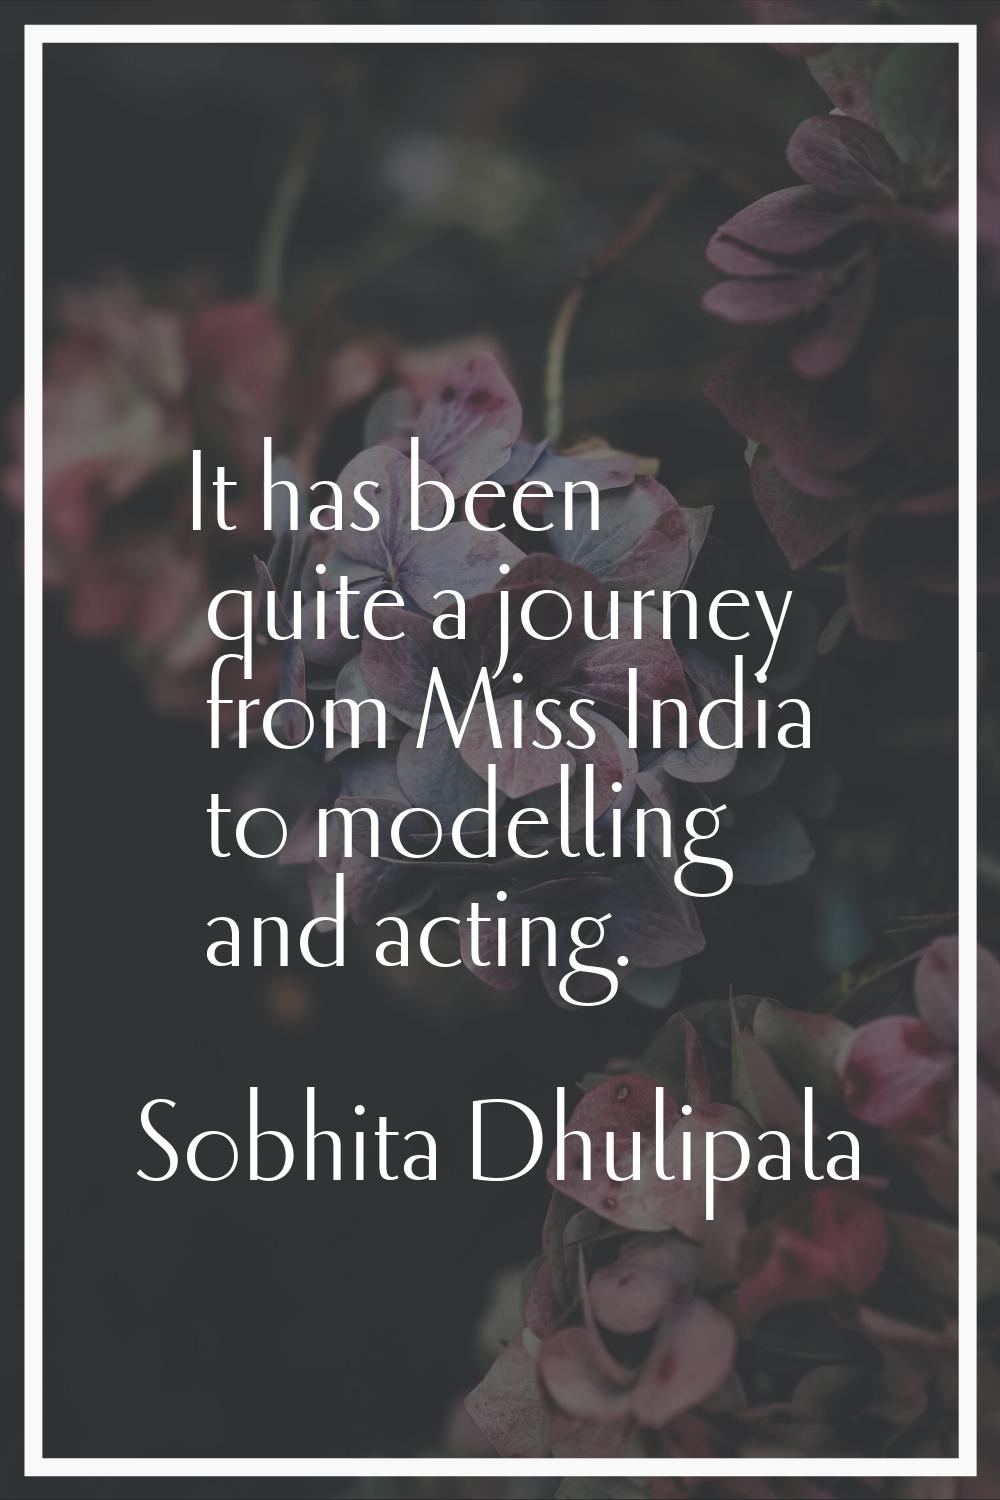 It has been quite a journey from Miss India to modelling and acting.